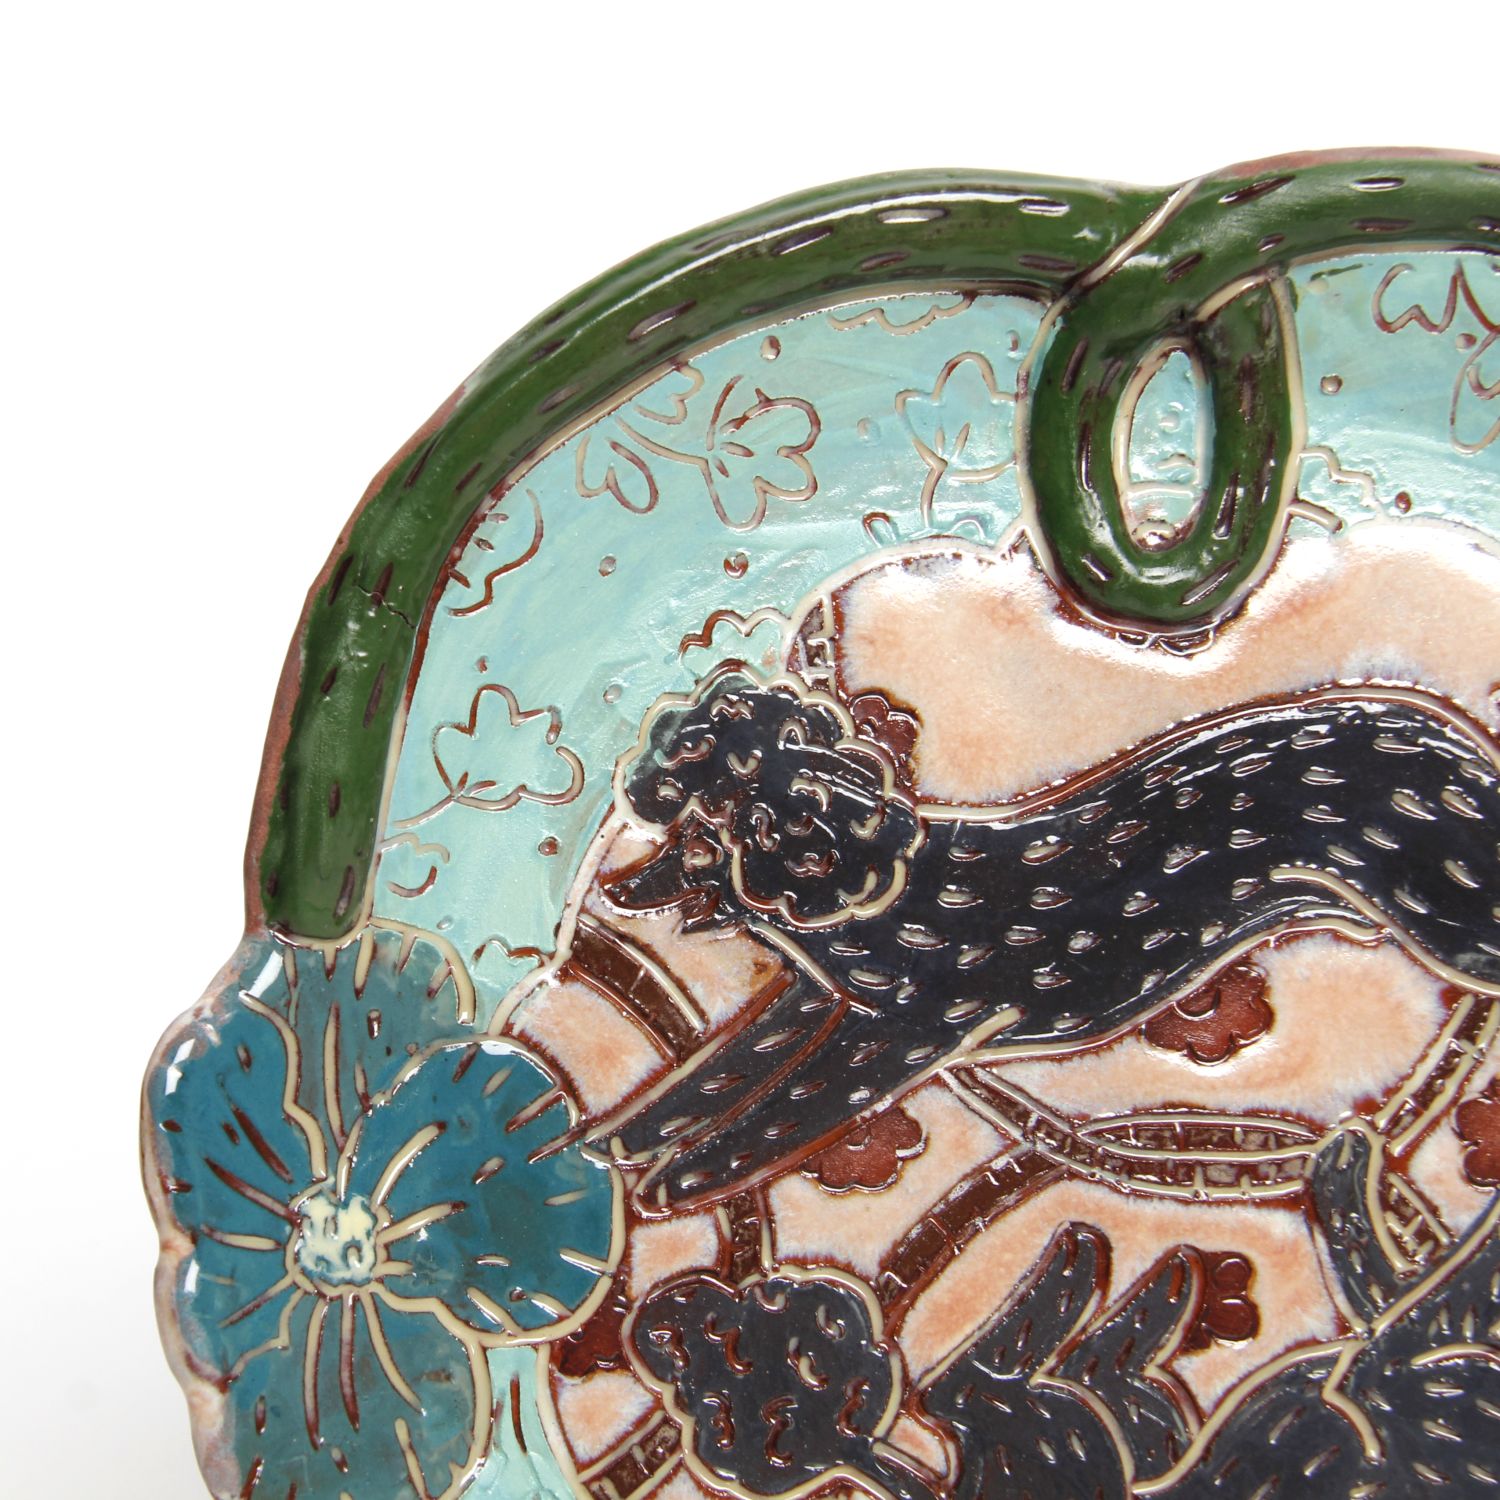 Zoe Pinnell: Poodle Plate Product Image 2 of 3